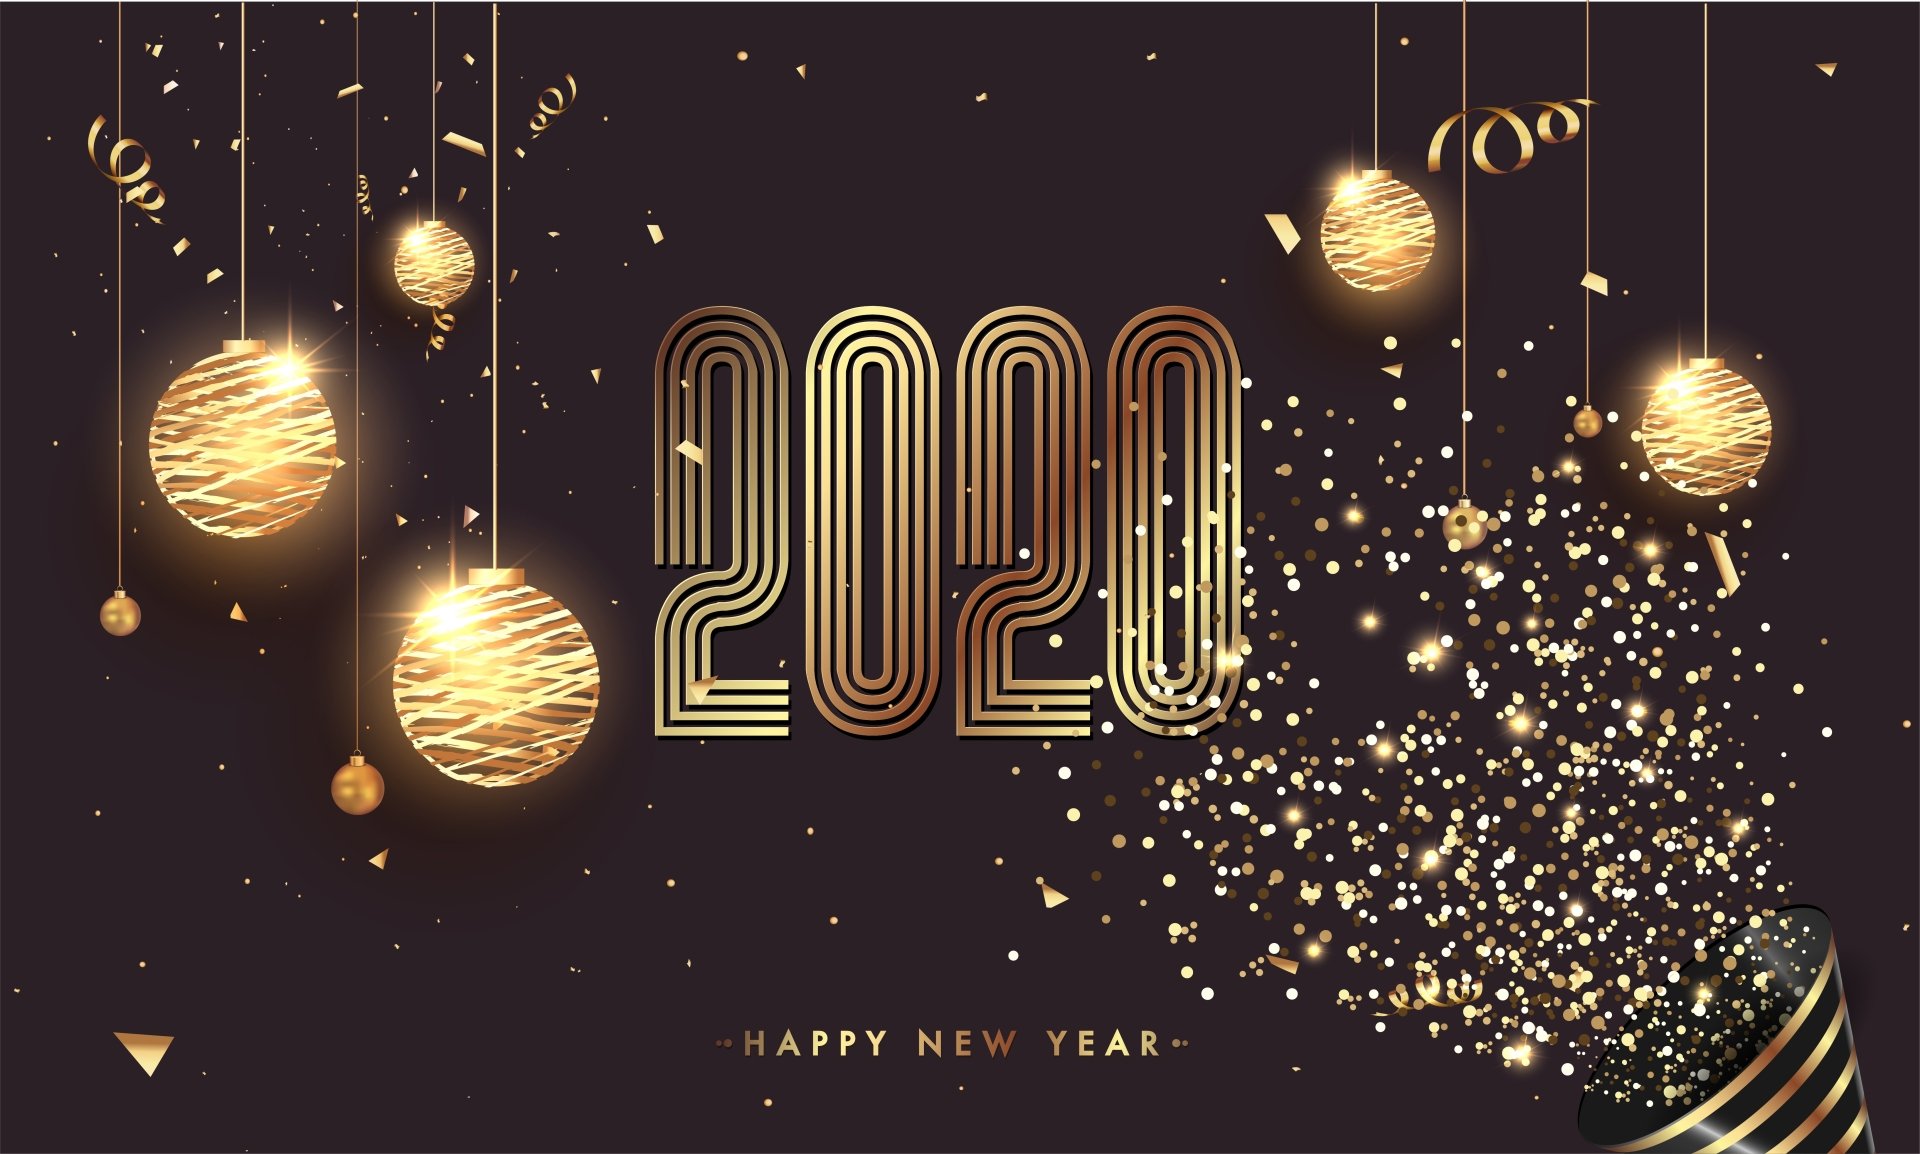 Download Happy New Year New Year Holiday New Year 2020 4k Ultra Hd Wallpaper 6823